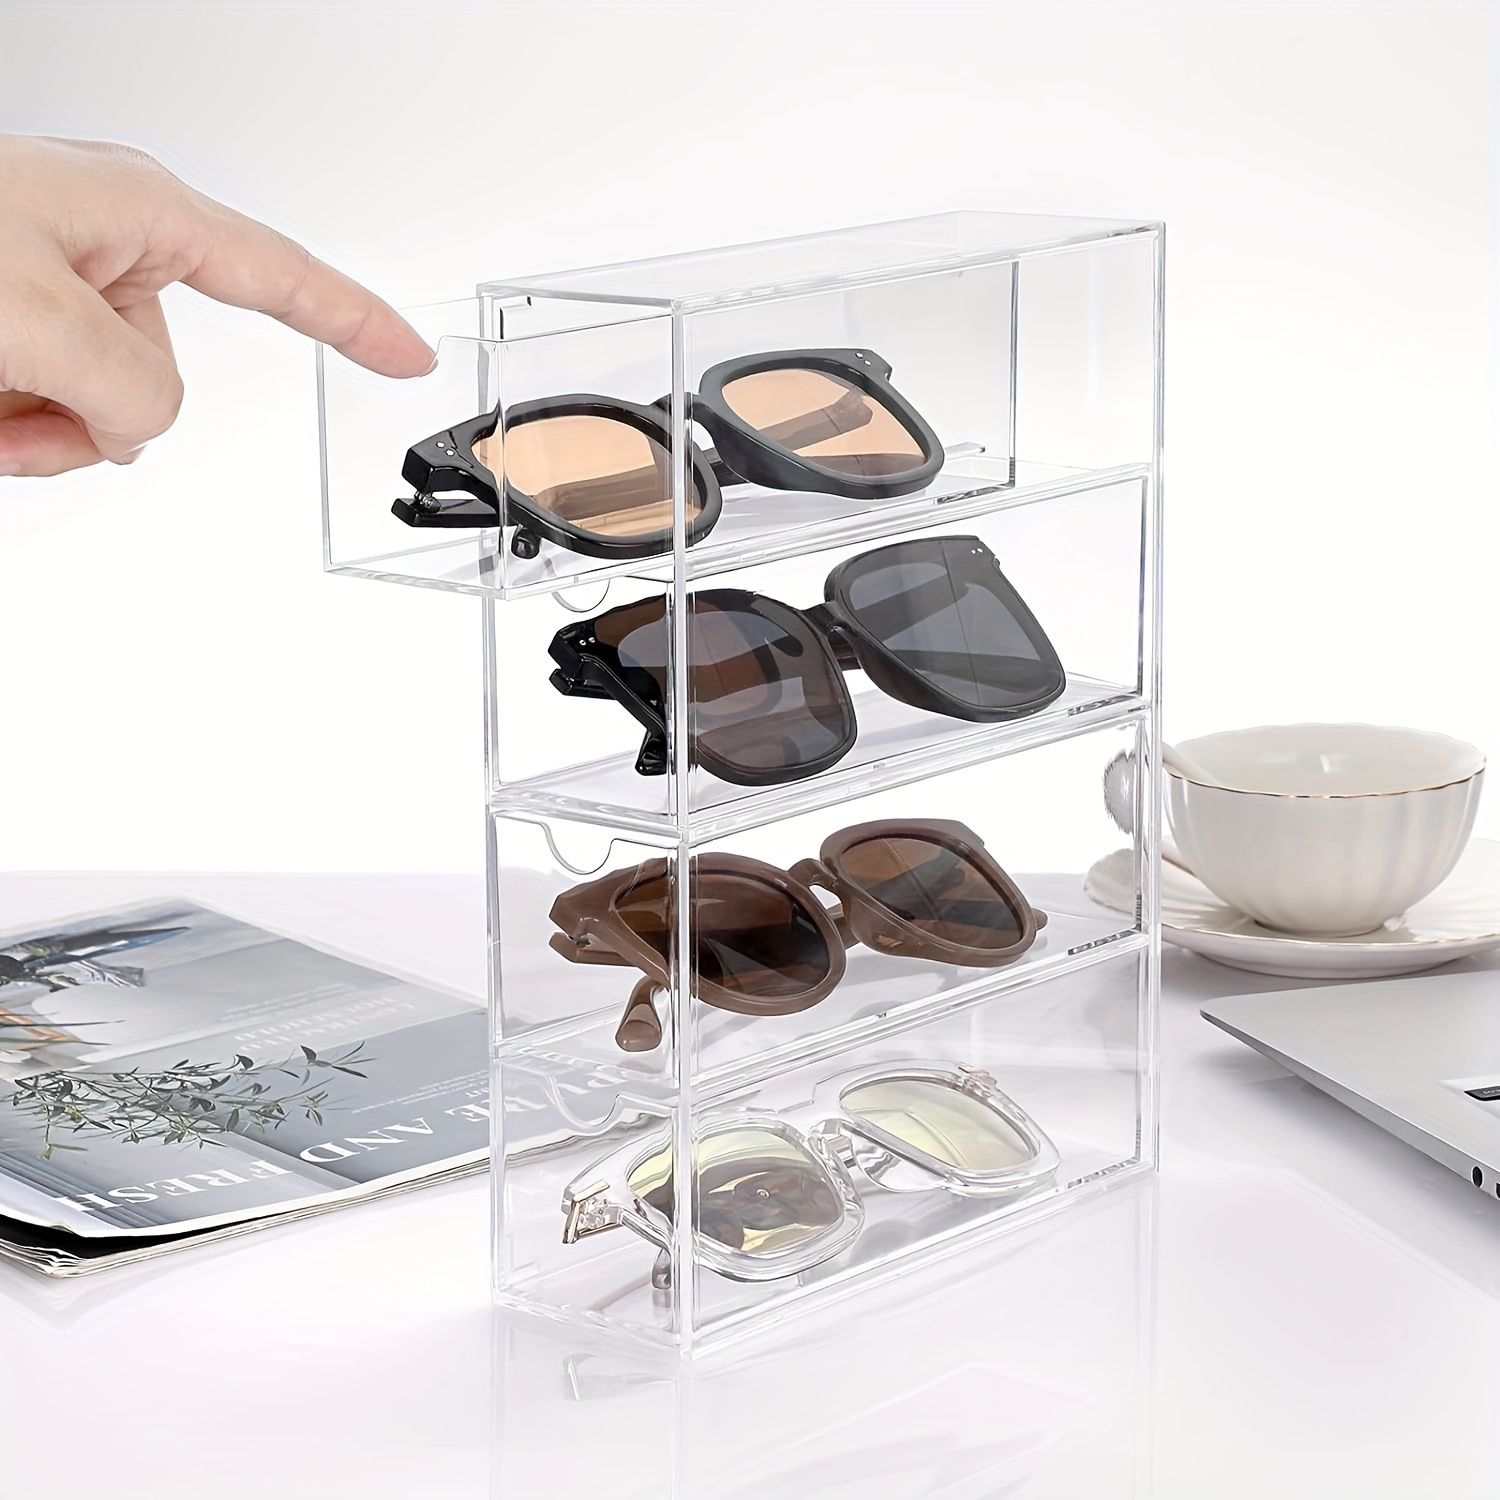 

Acrylic Glasses Organizer Clear Eyewear Display Case Multi-purpose Storage Box For Glasses, Cosmetics, Office Supplies, And Jewelry